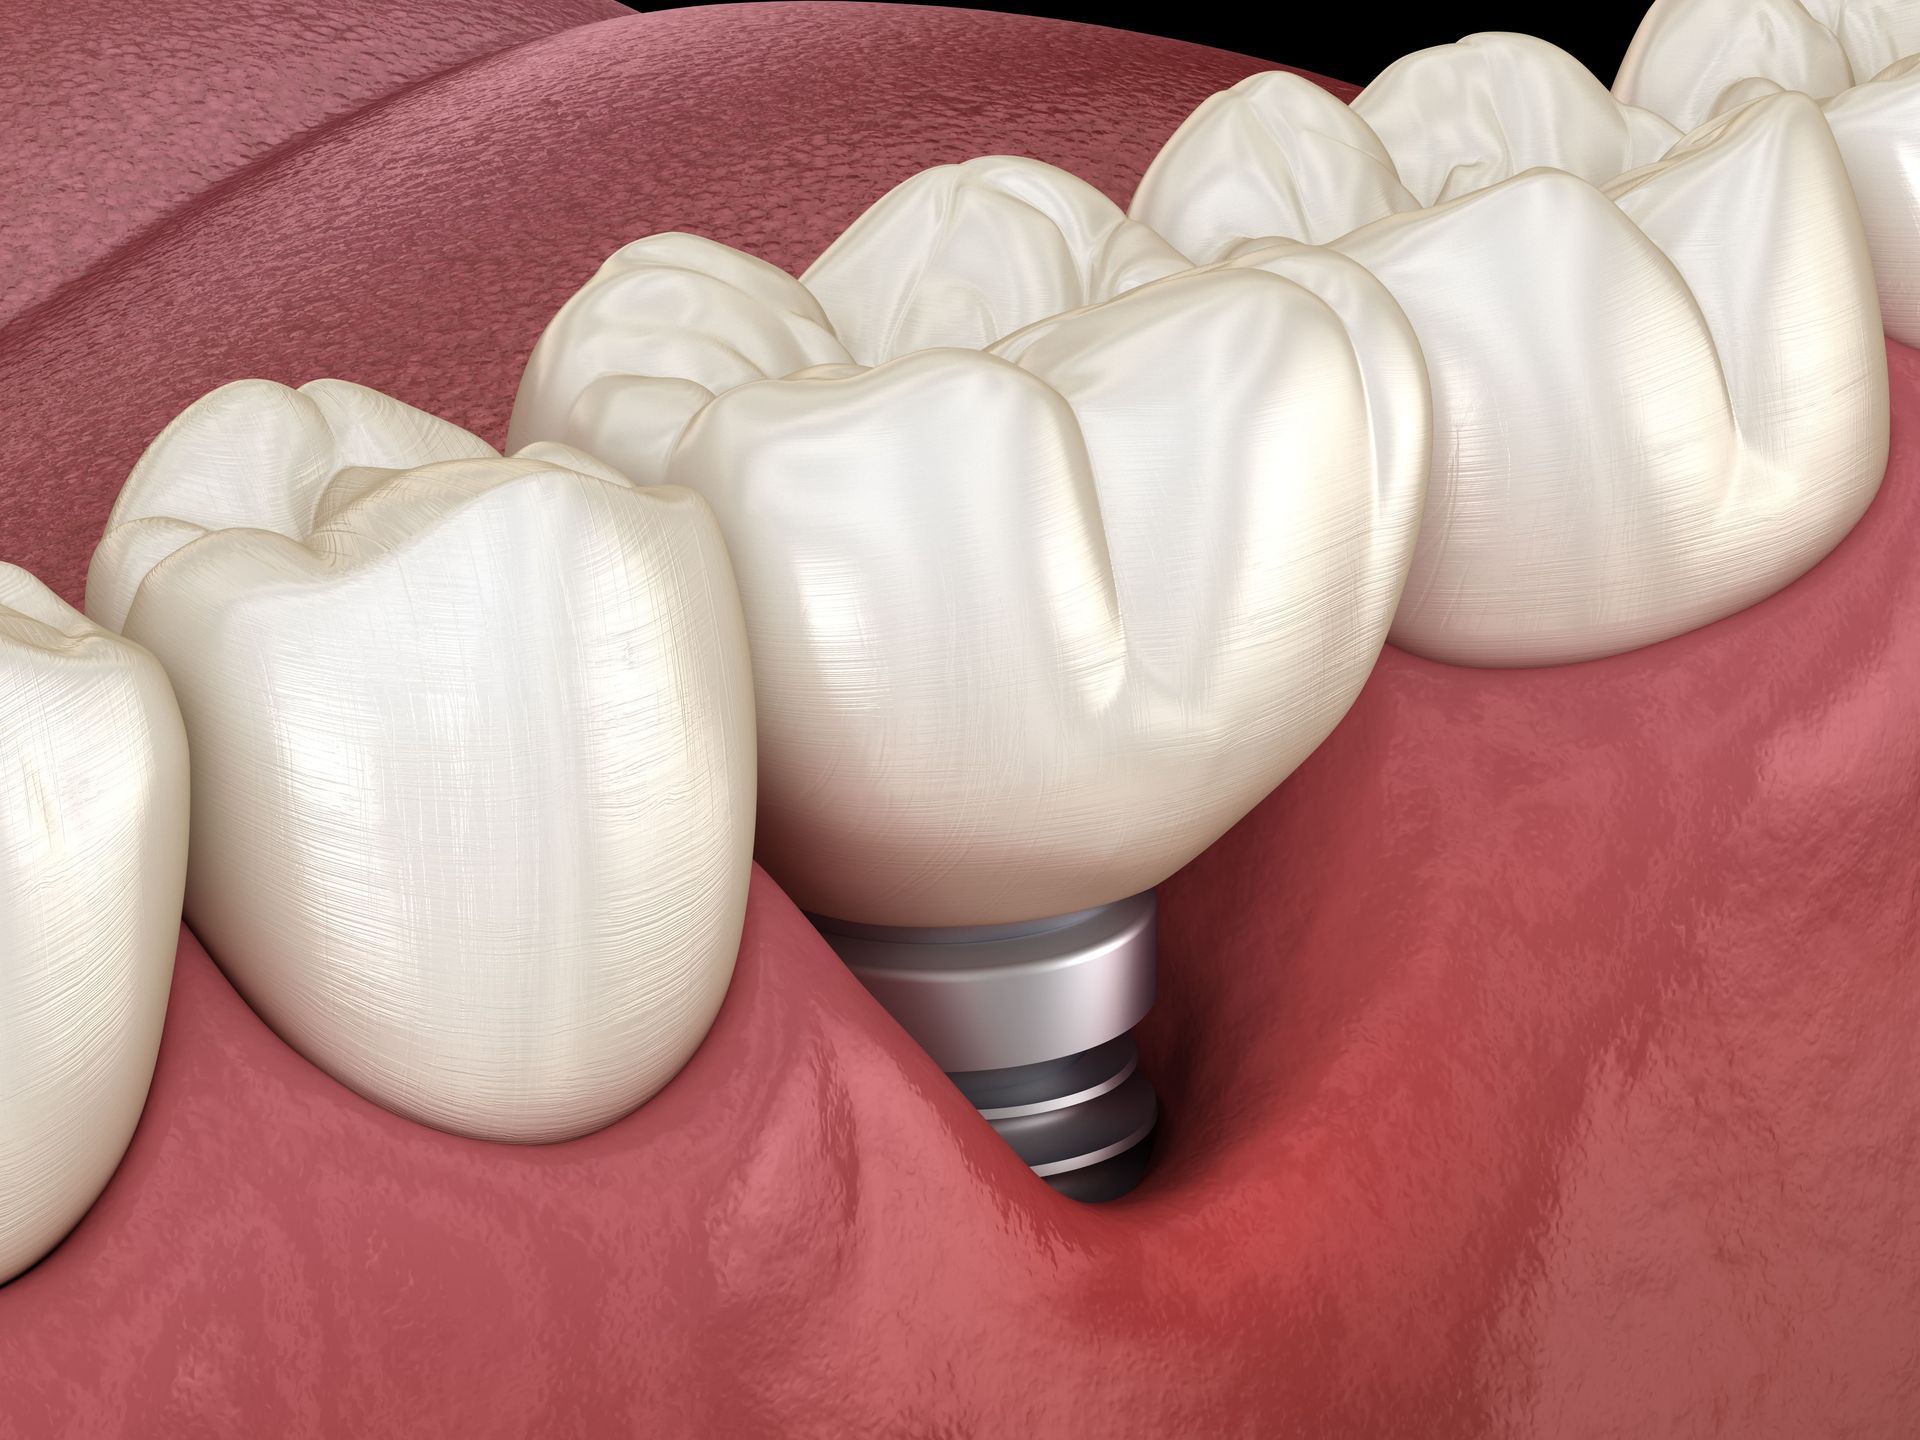 A computer generated image of a dental implant with a recessed gum